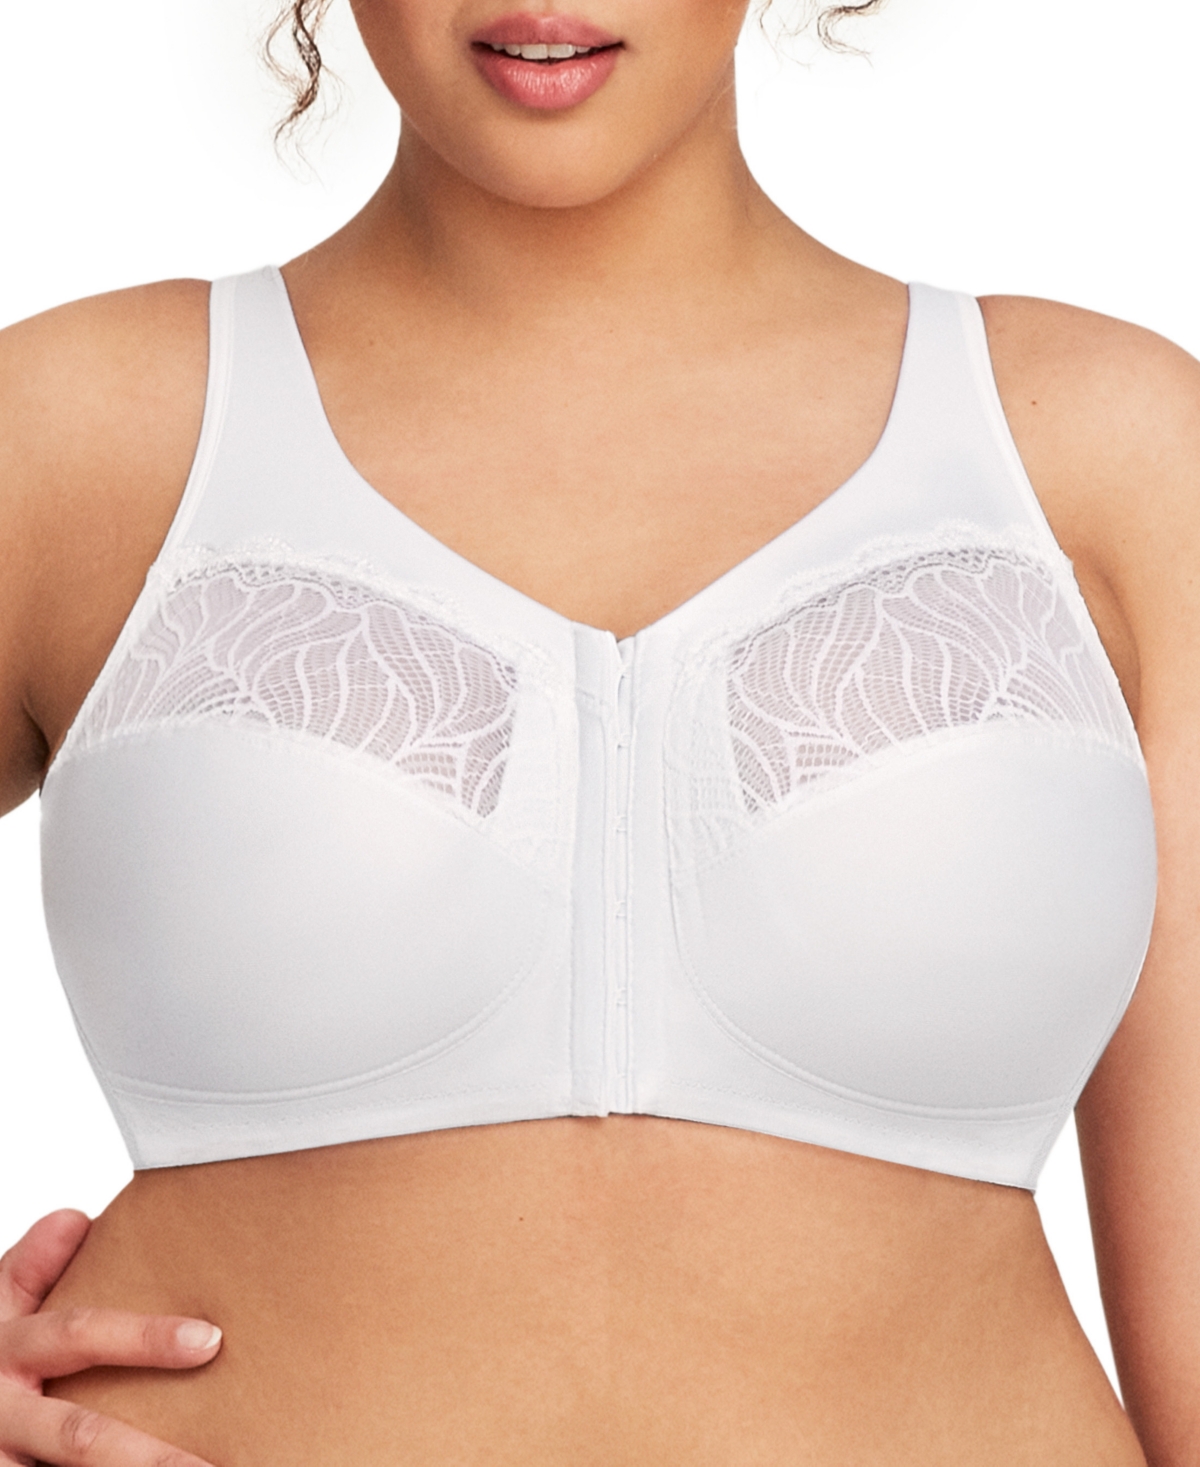 Buy Glamorise Women's MagicLift Front Close Posture Support Bra, Cafe, 42J  at